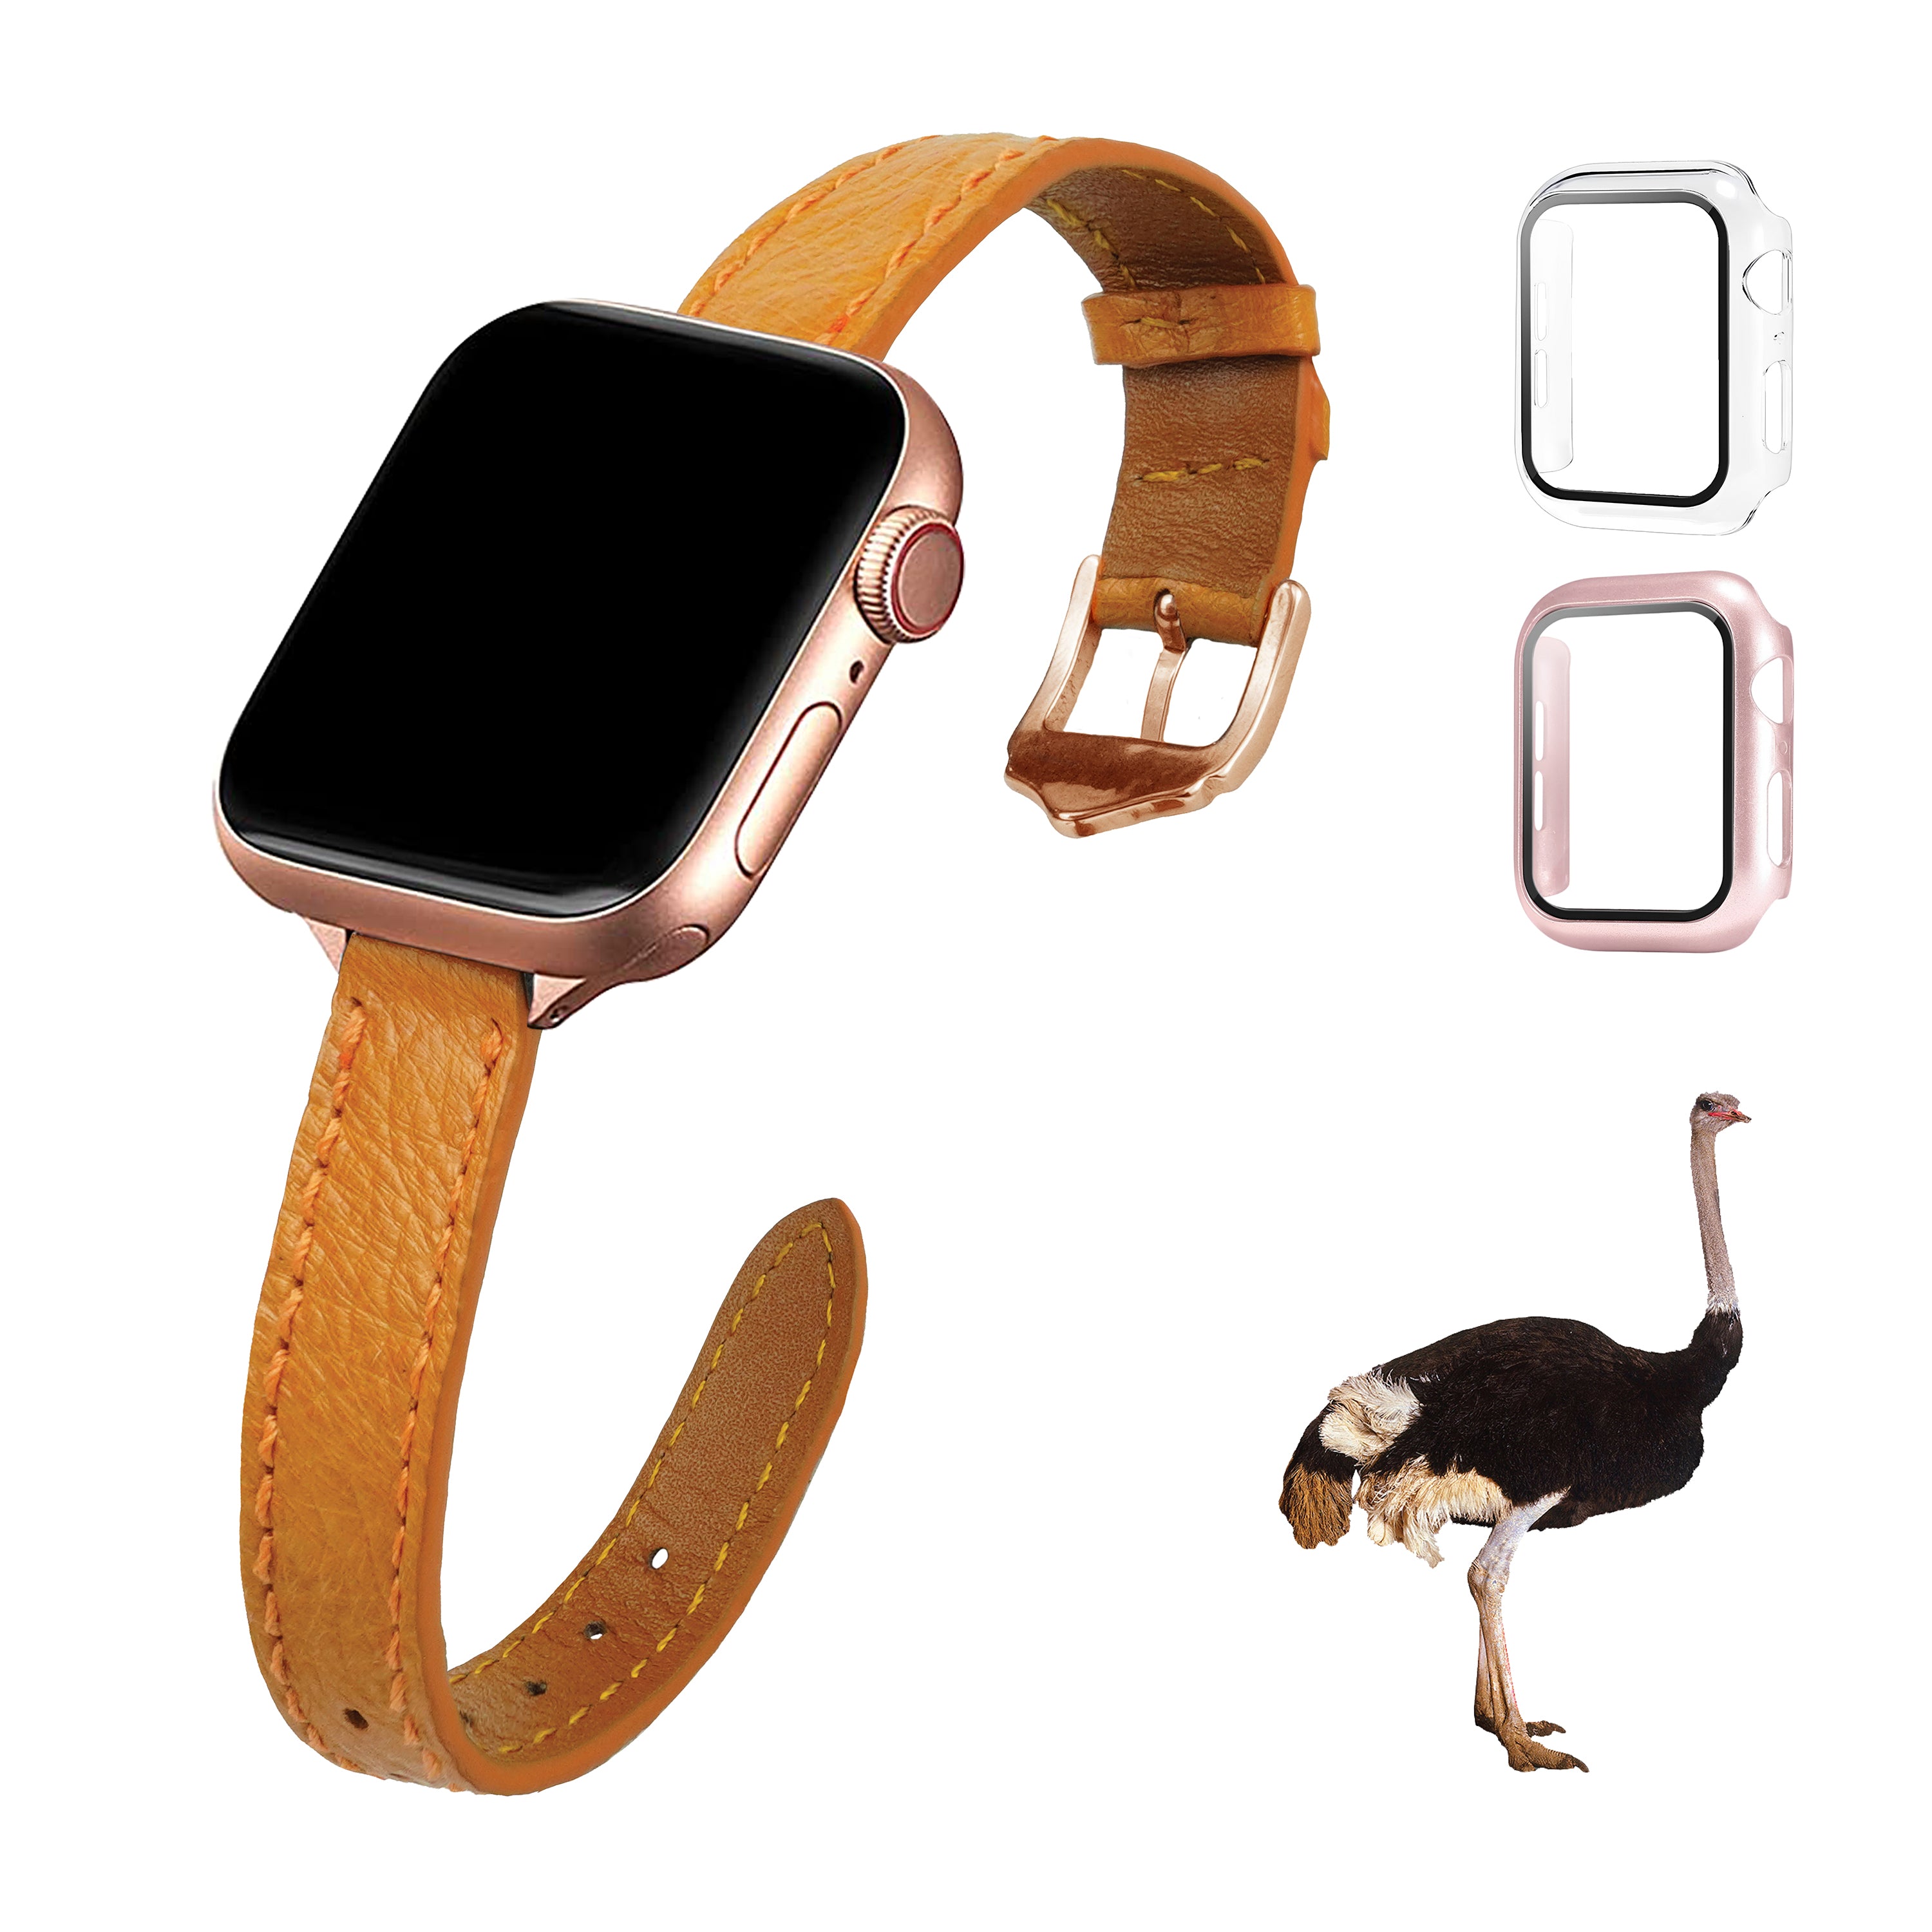 Tan Flat Ostrich Leather Band Compatible Apple Watch Iwatch 38mm Screen Protector Case Gold Adapter Replacement Strap For Smartwatch Series 1 2 3 Leather Handmade AW-182G-W-38MM